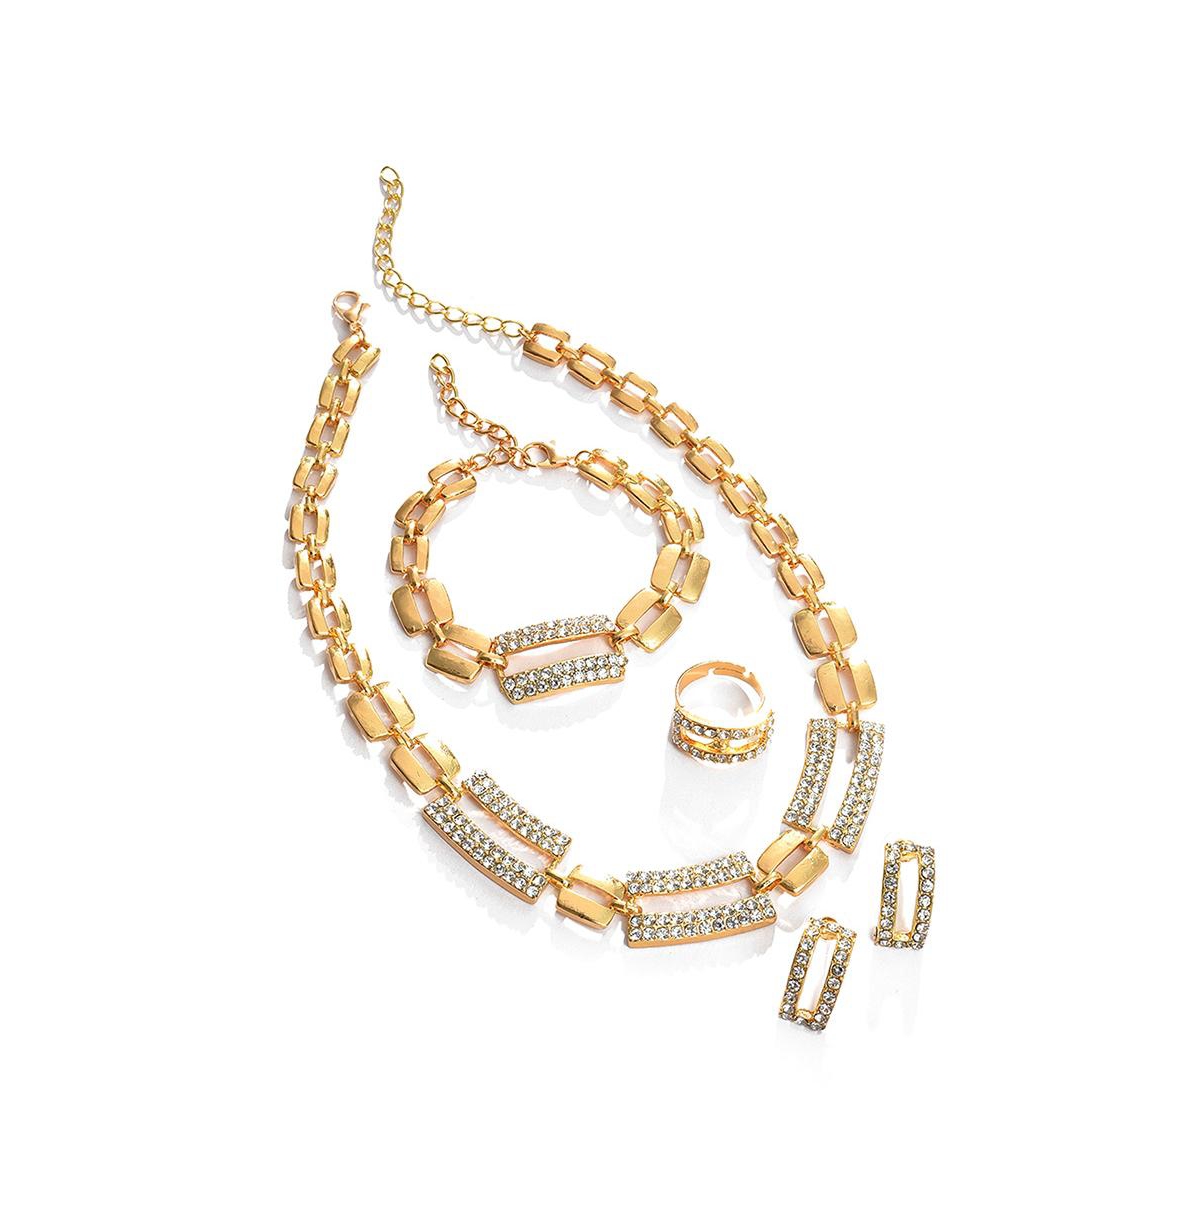 Women's Gold Embellished Geometric Necklace, Earrings, Bracelet And Ring (Set Of 4) - Gold